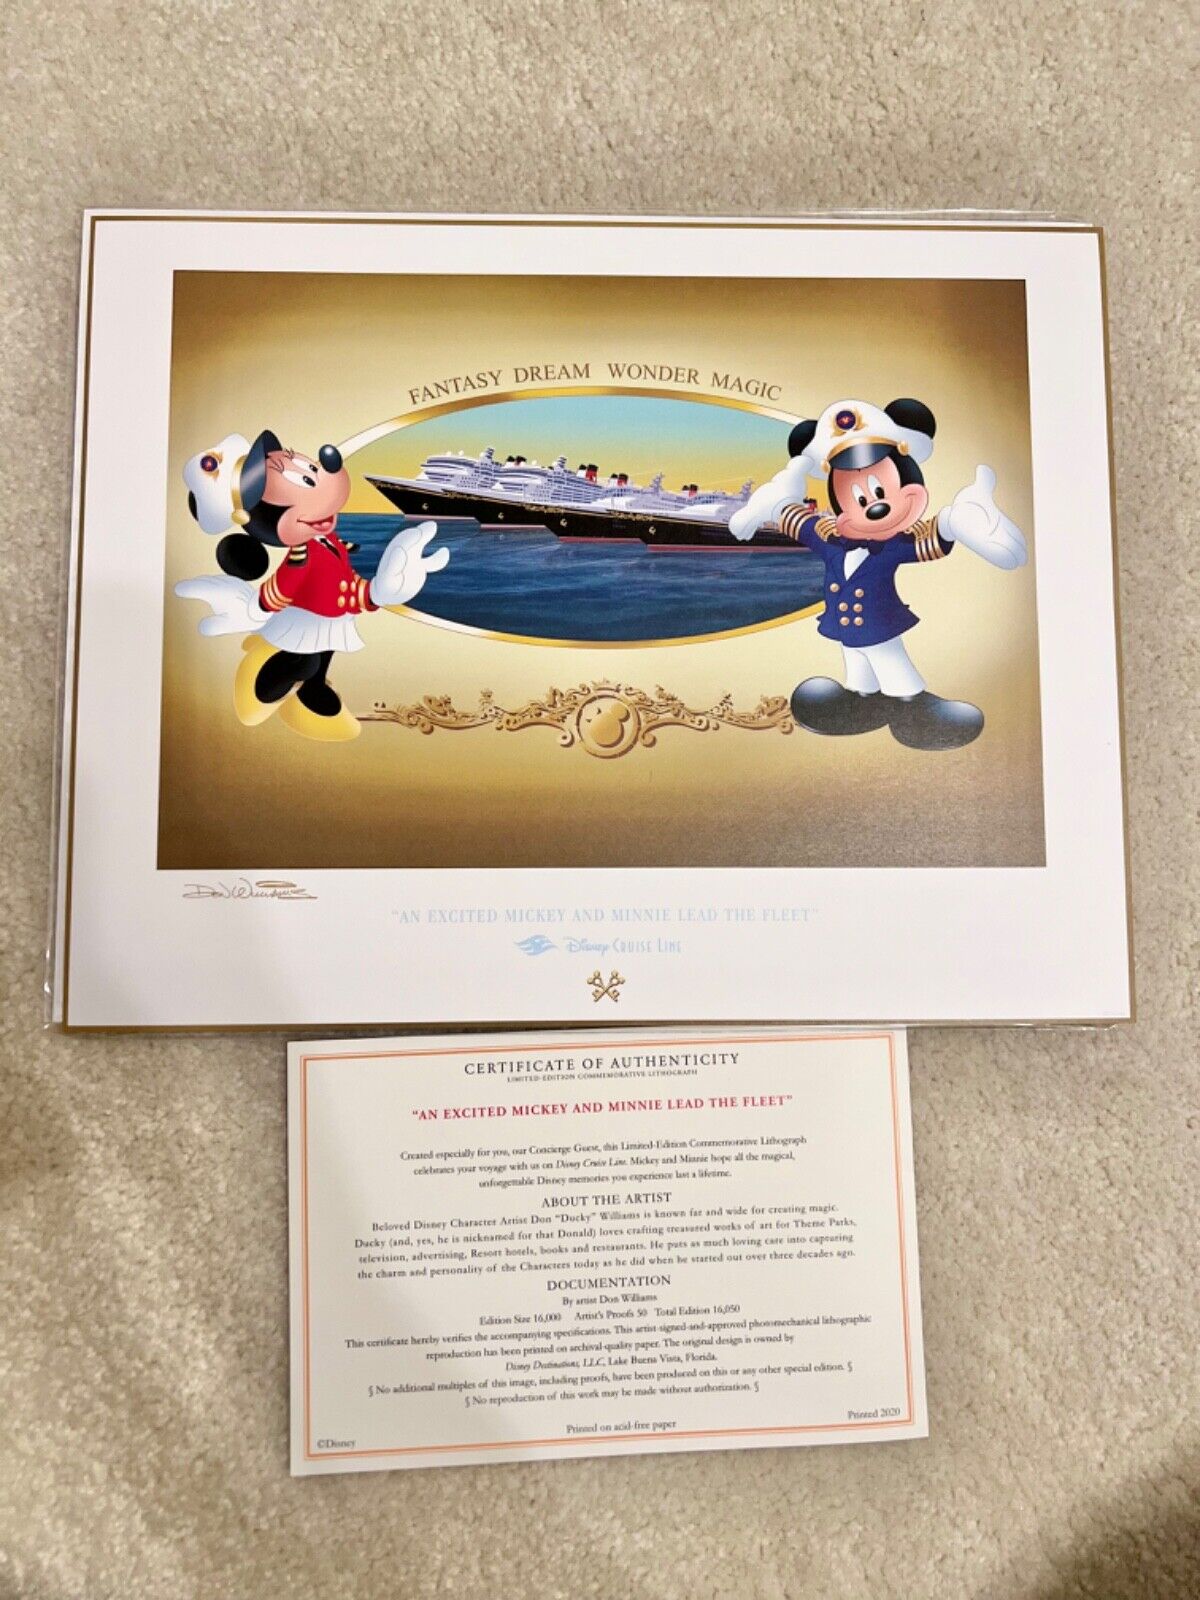 Disney Cruise Line Lithograph “An Excited Mickey And Minnie Lead The Fleet”